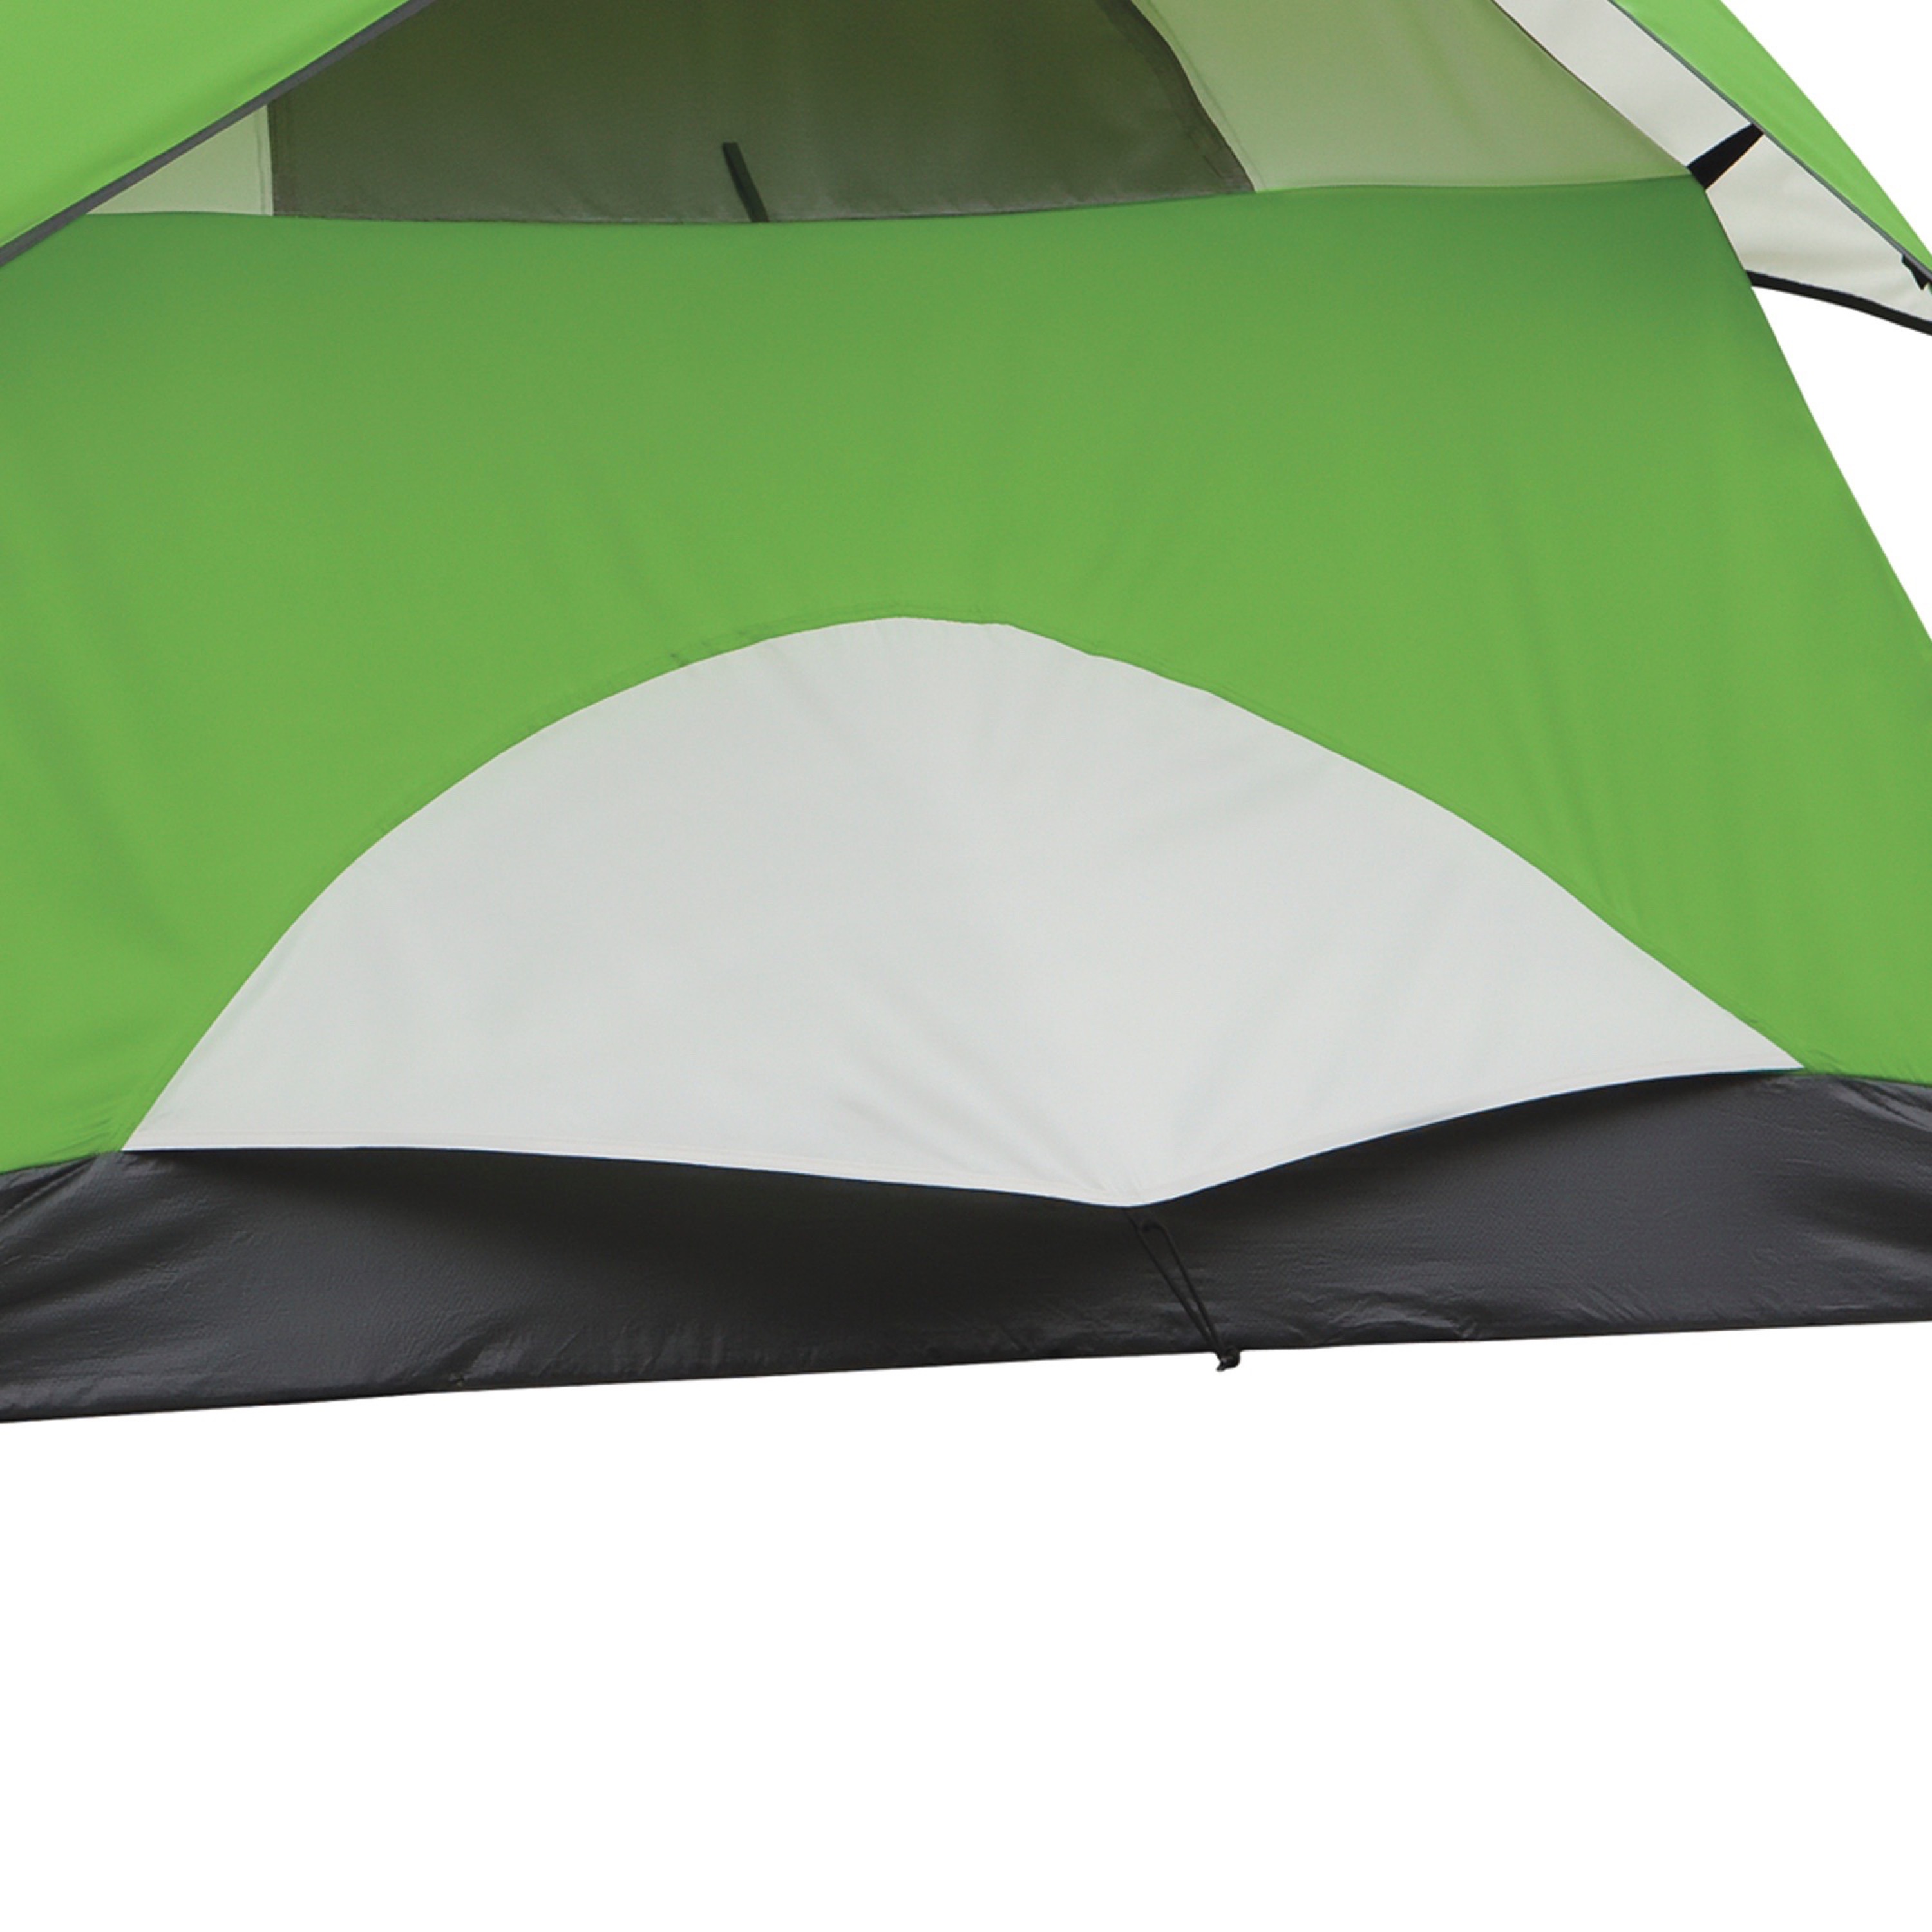 Coleman Sundome 2-Person Weatherproof Dome Tent with E-Port, 1 Room, Green - image 3 of 9